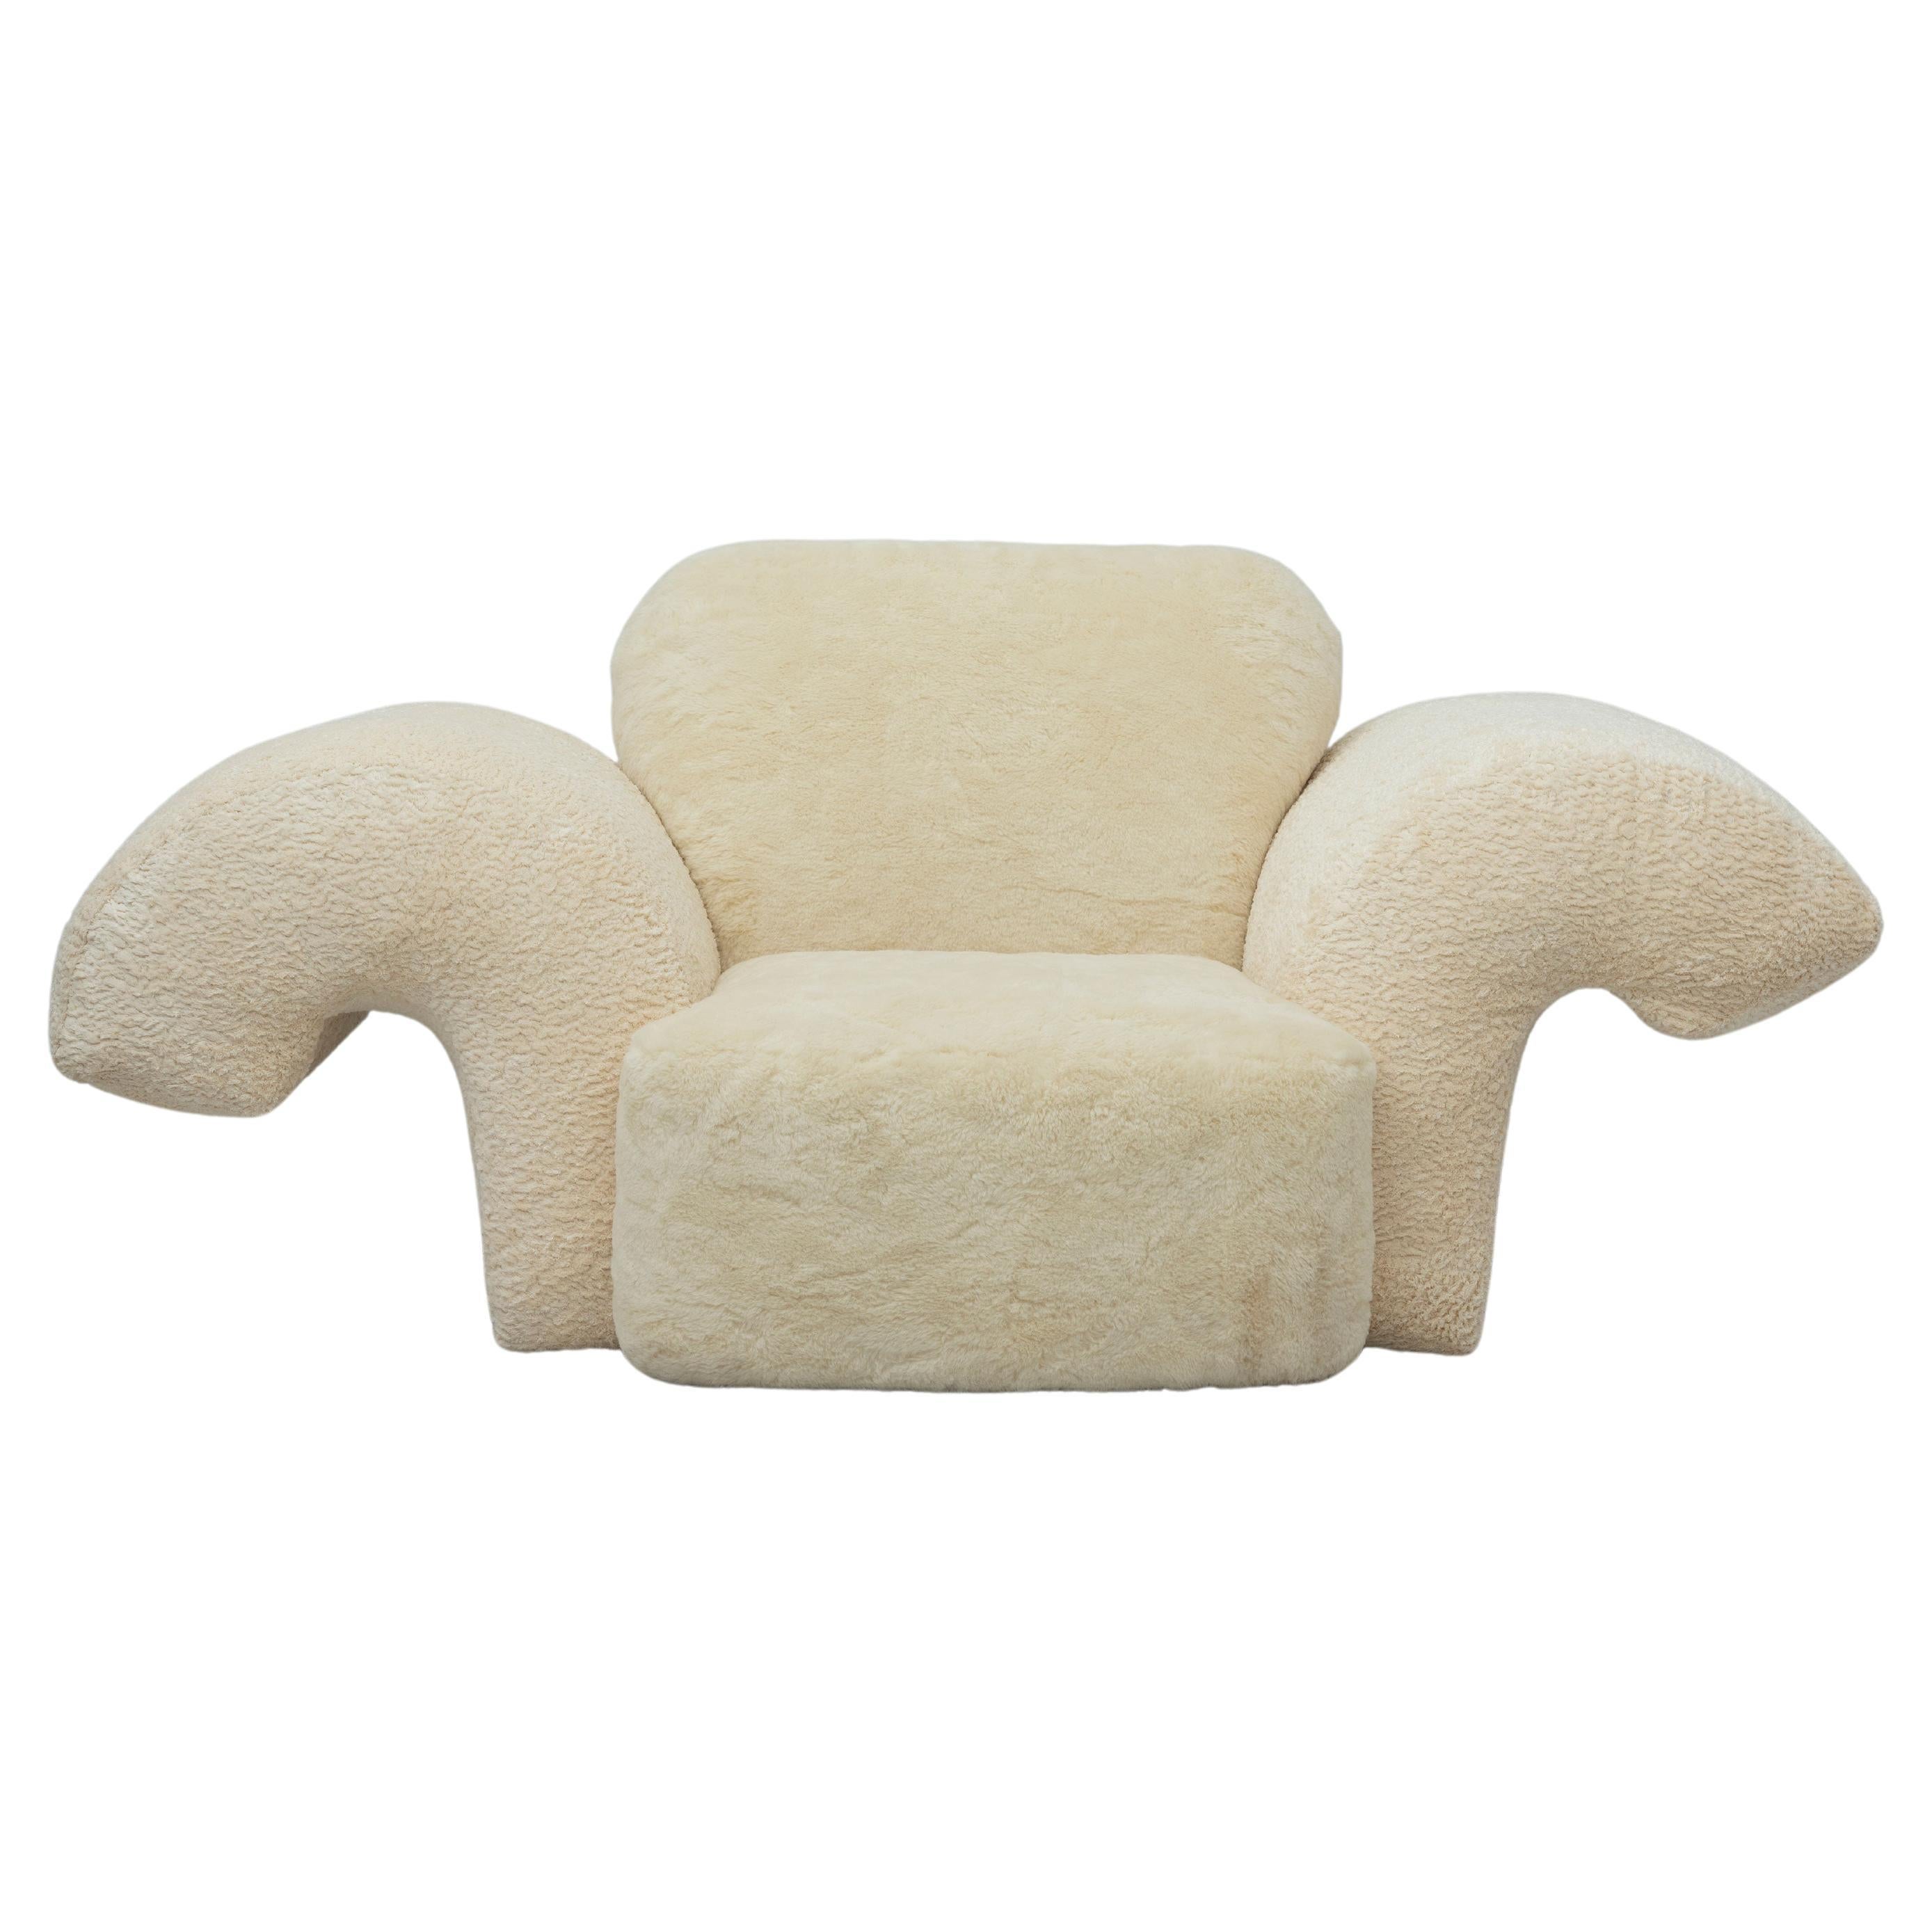 Contemporary Piazza Chair in Feather Boucle and Yeti Wool Hair